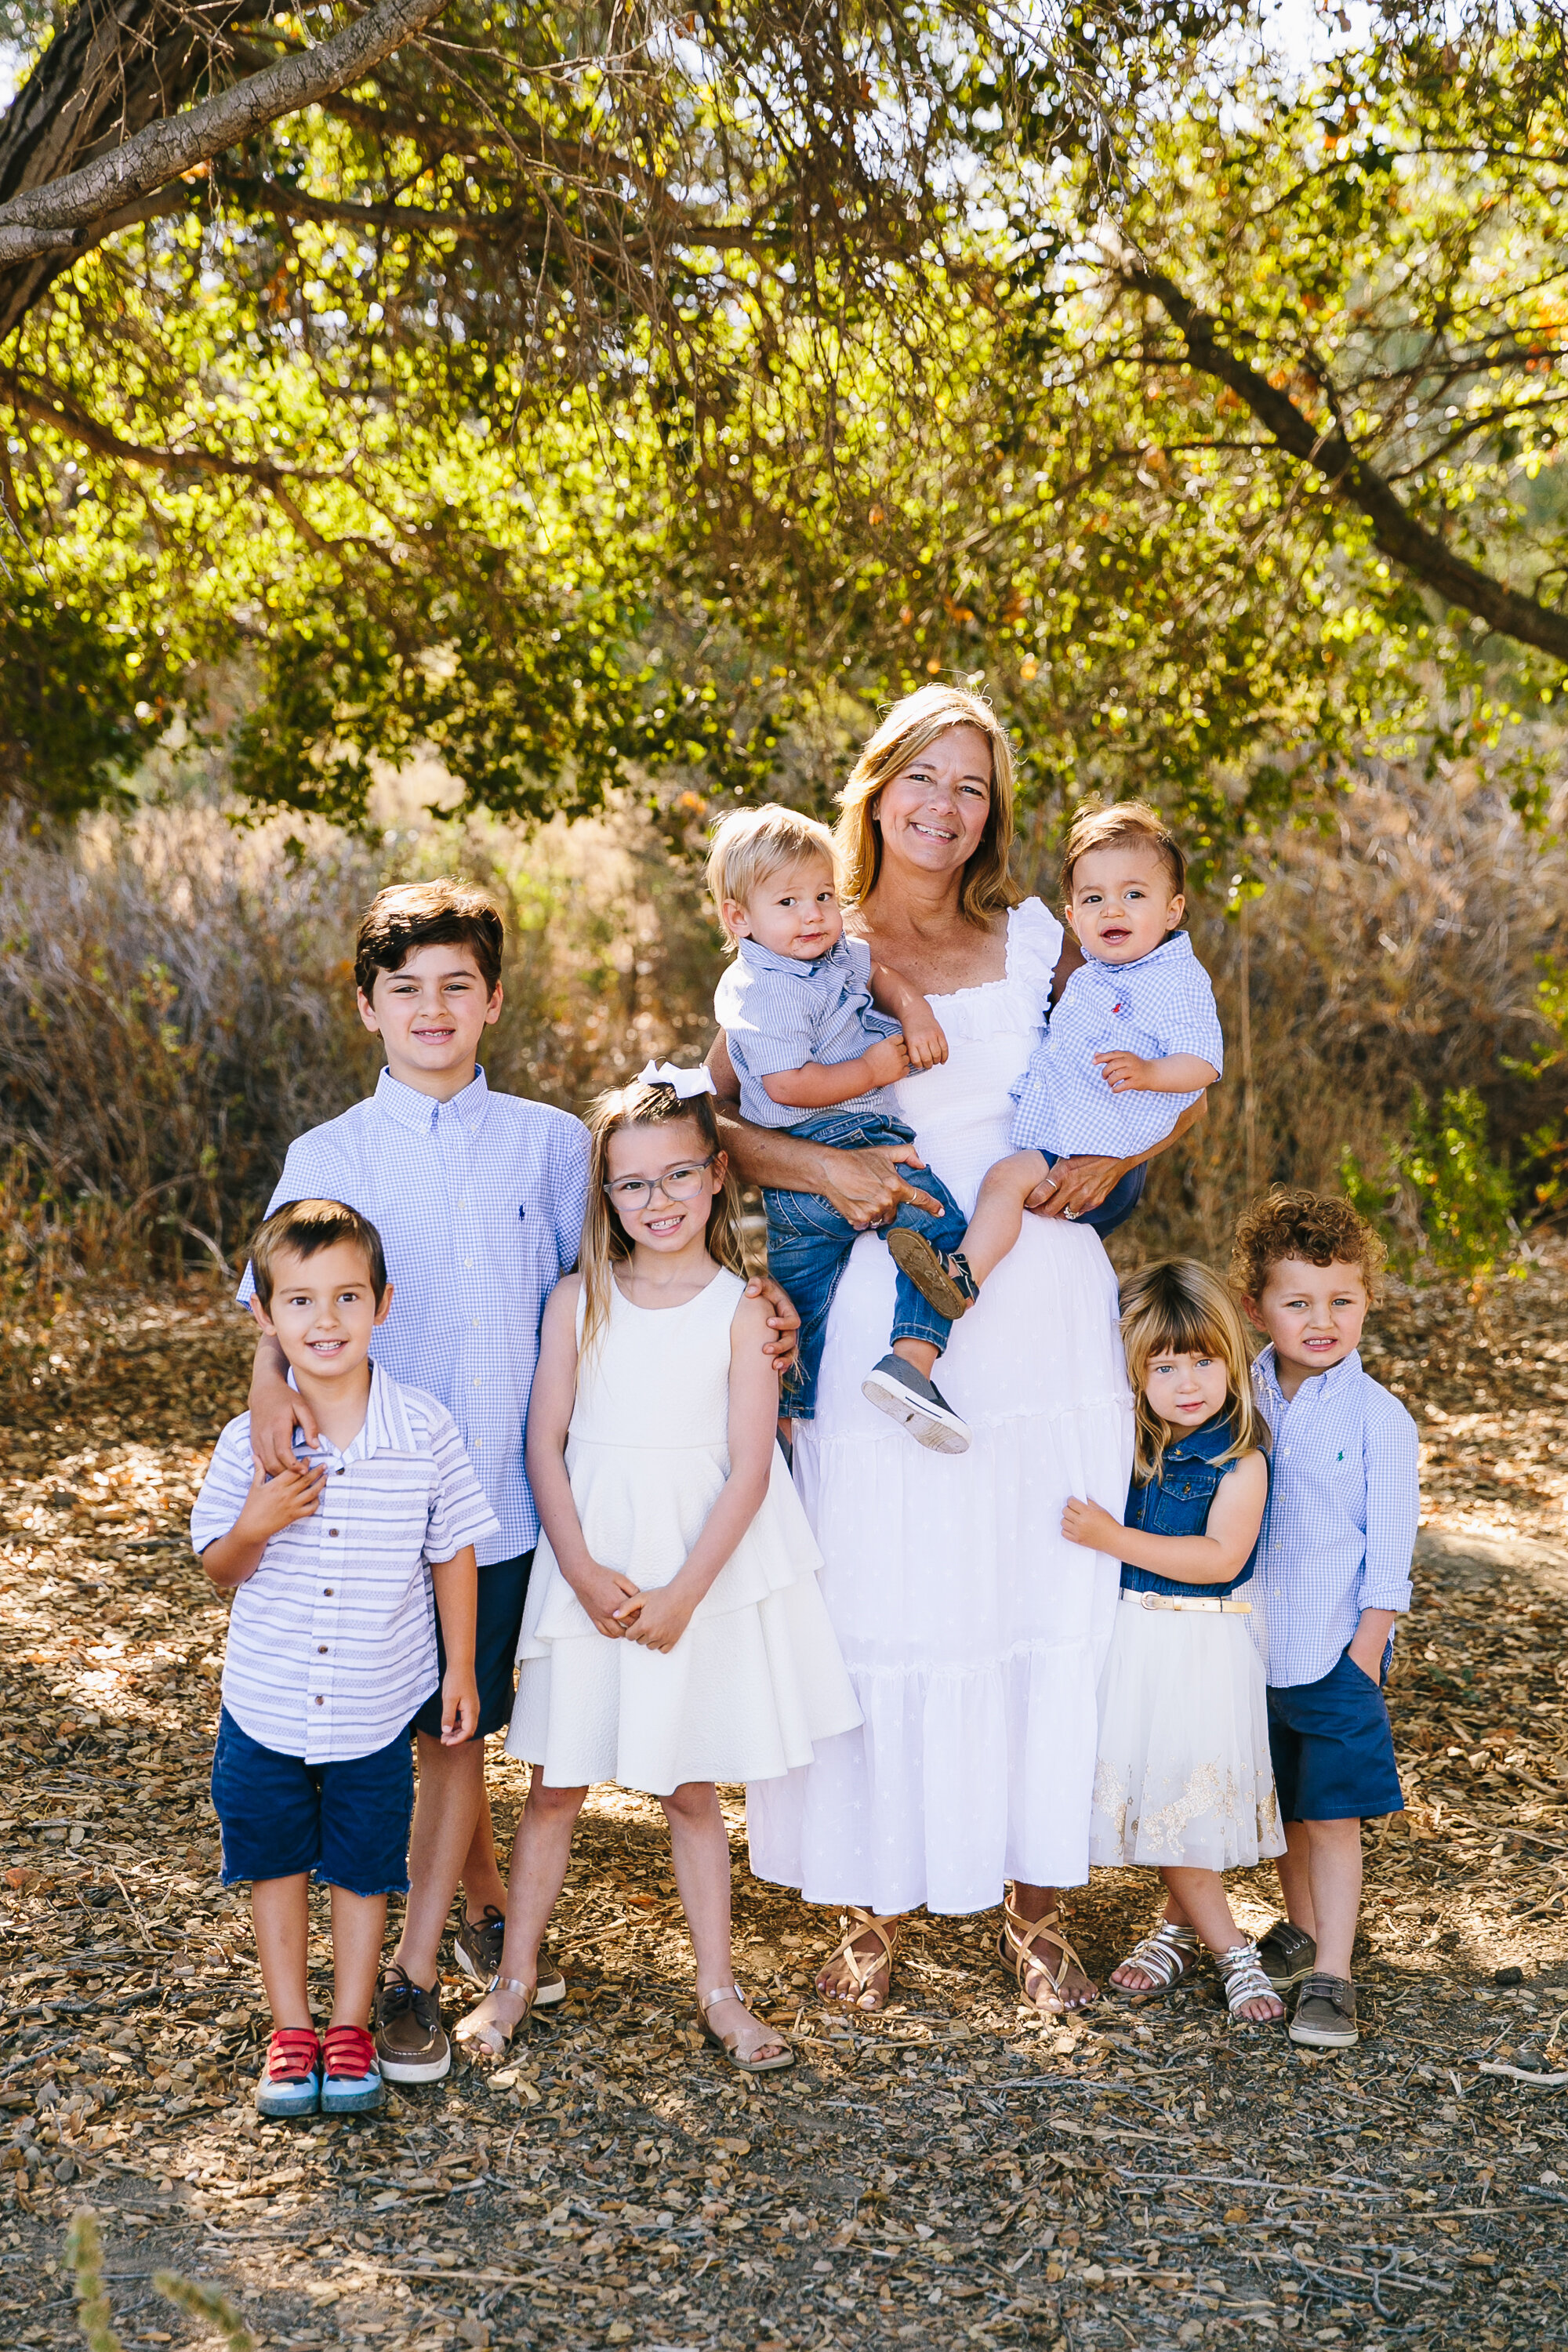 Los_Angeles_Family_Photography_Orange_County_Children_Babies_Field_Farm_Outdoors_Morning_Session_California_Girls_Boys_Kids_Photography-0610.jpg